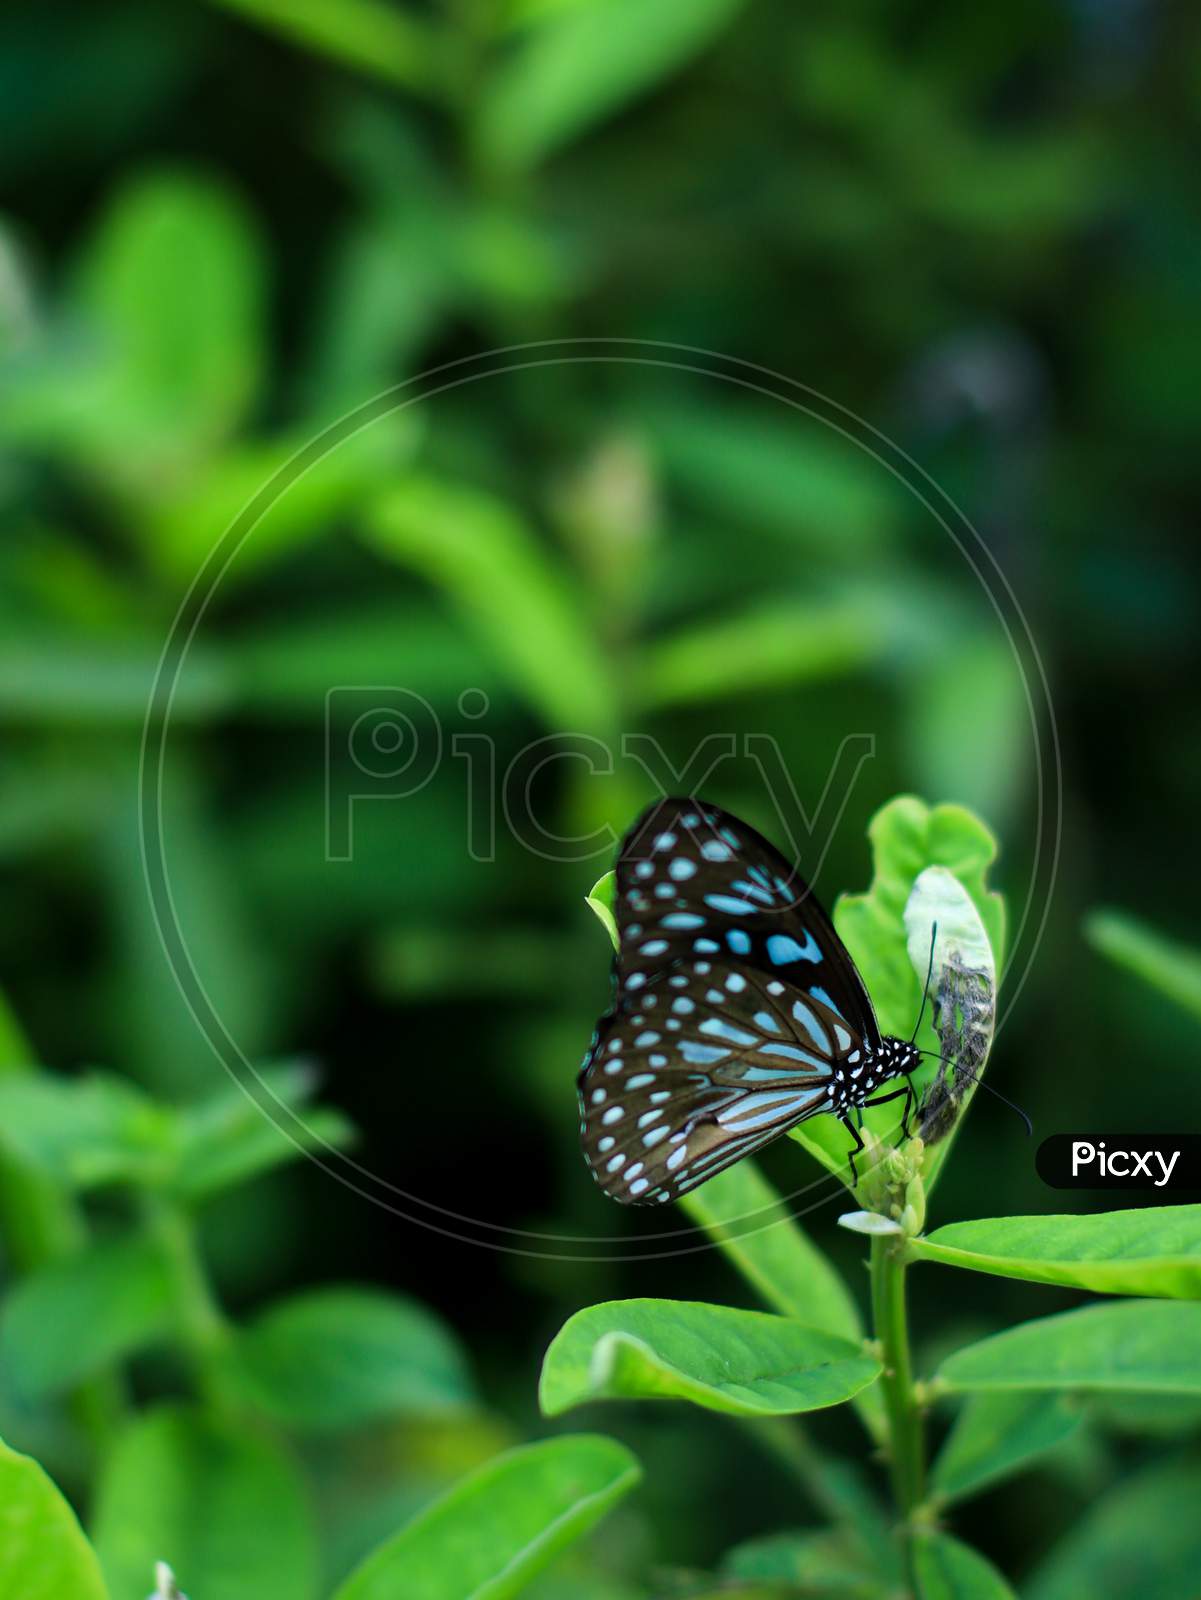 black-blue butterfly with beautiful pattern on the wings sitting on a flower